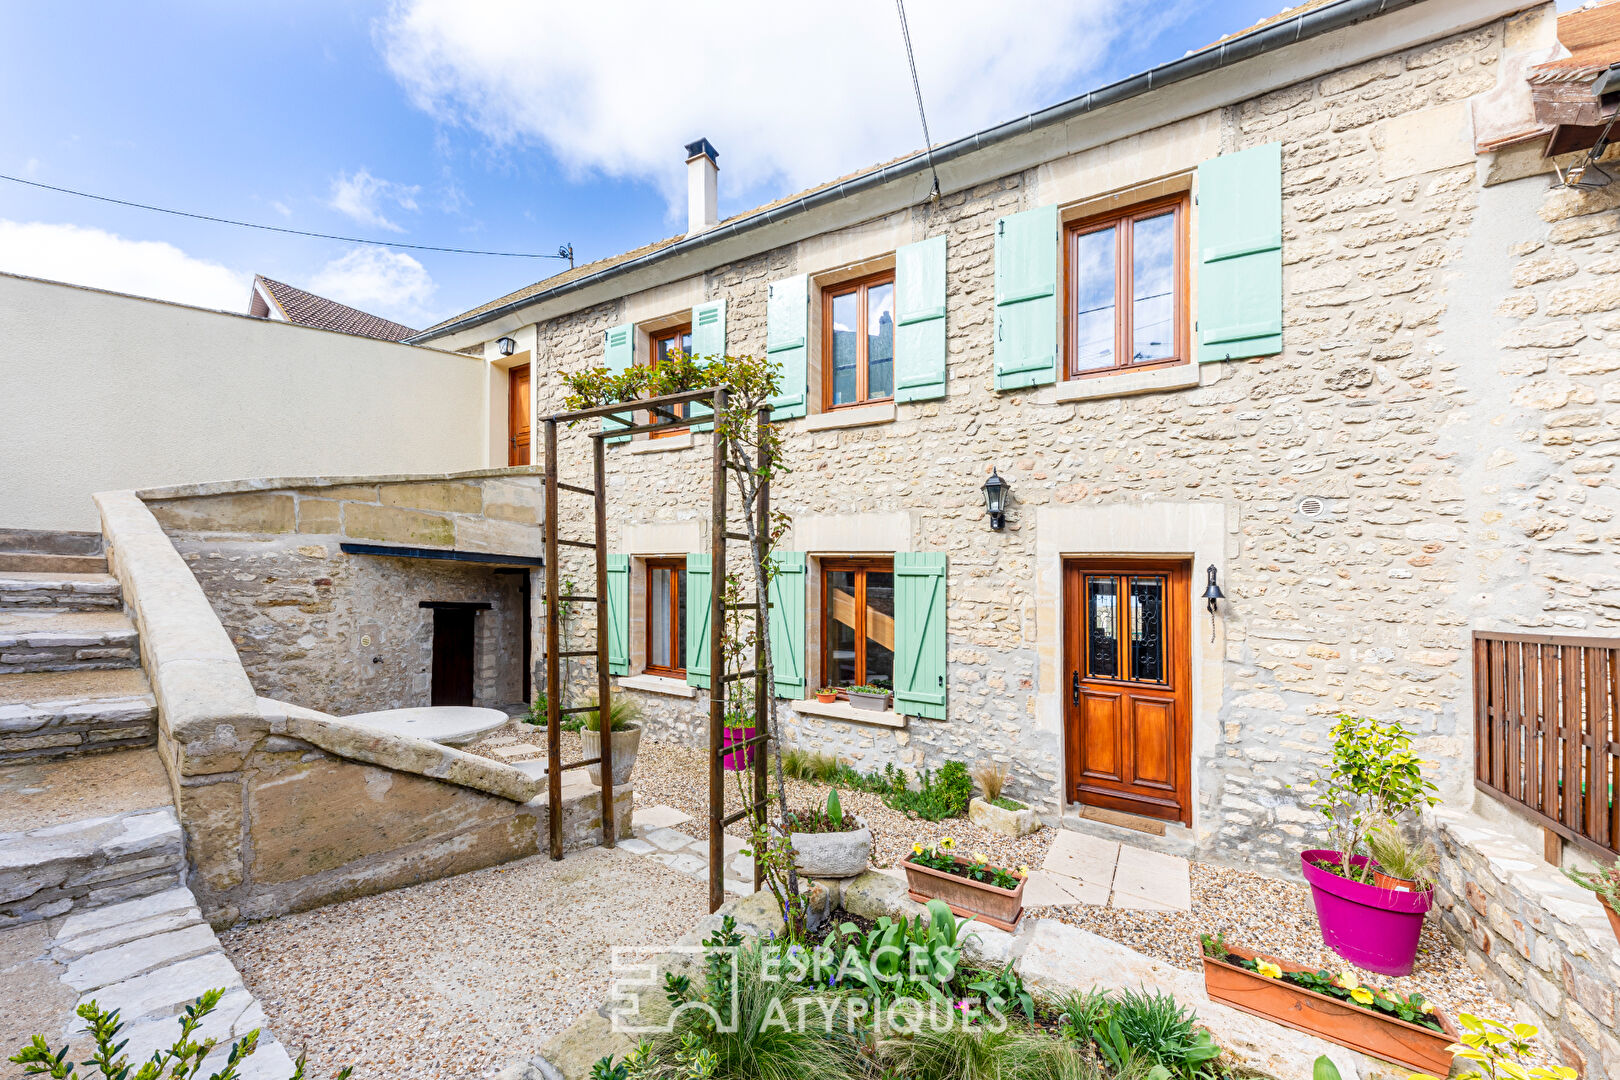 Charming residence in exposed stones in the heart of the village.